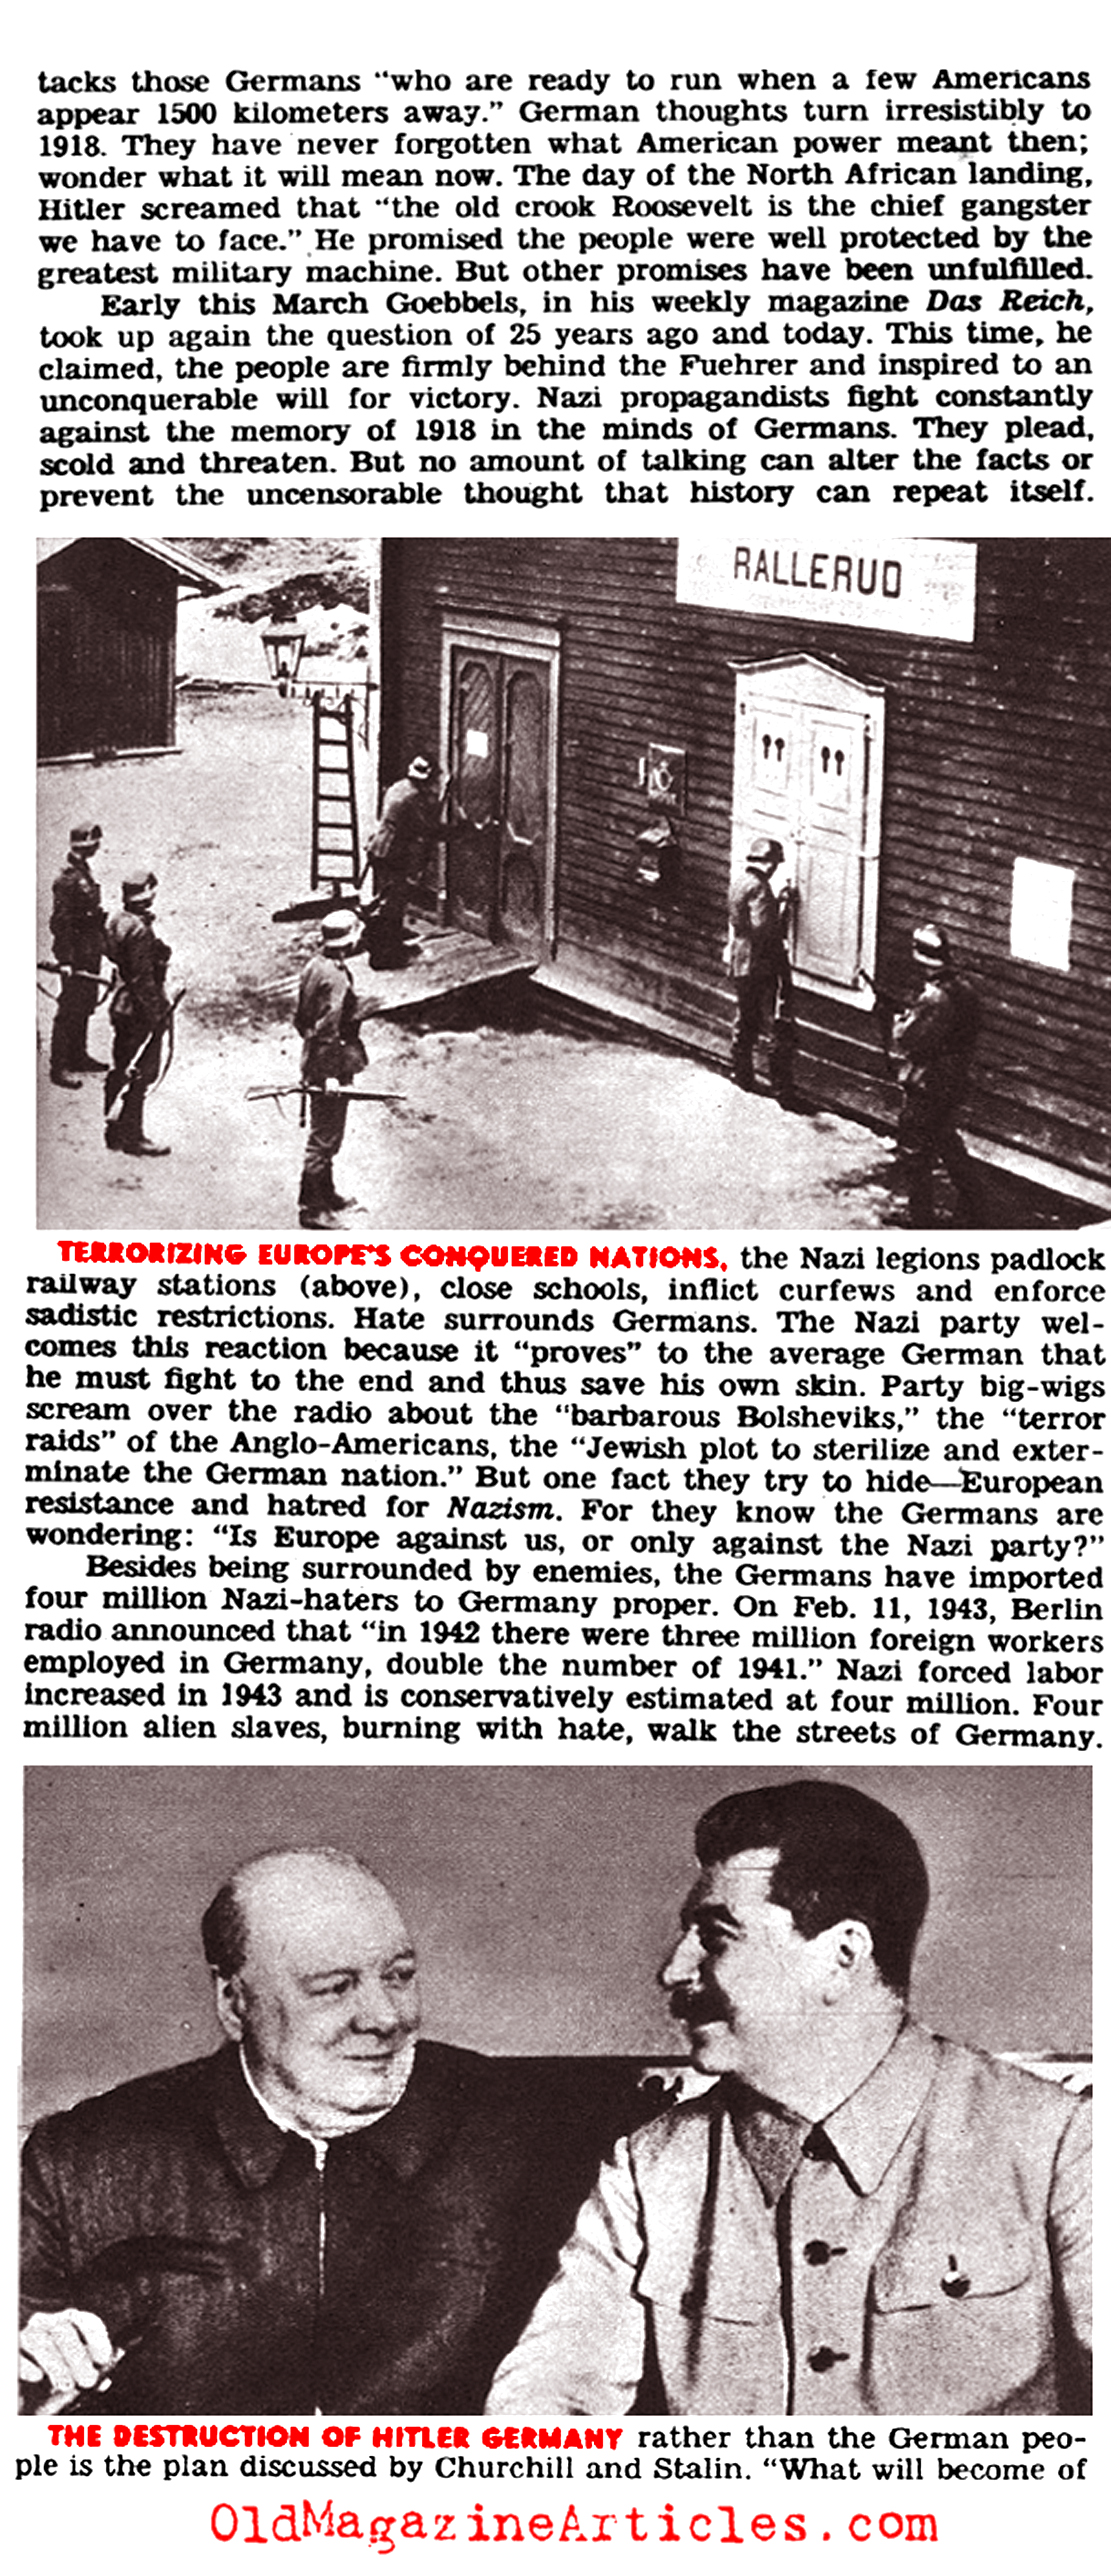 What Were the Germans Thinking? (Click Magazine, 1943)